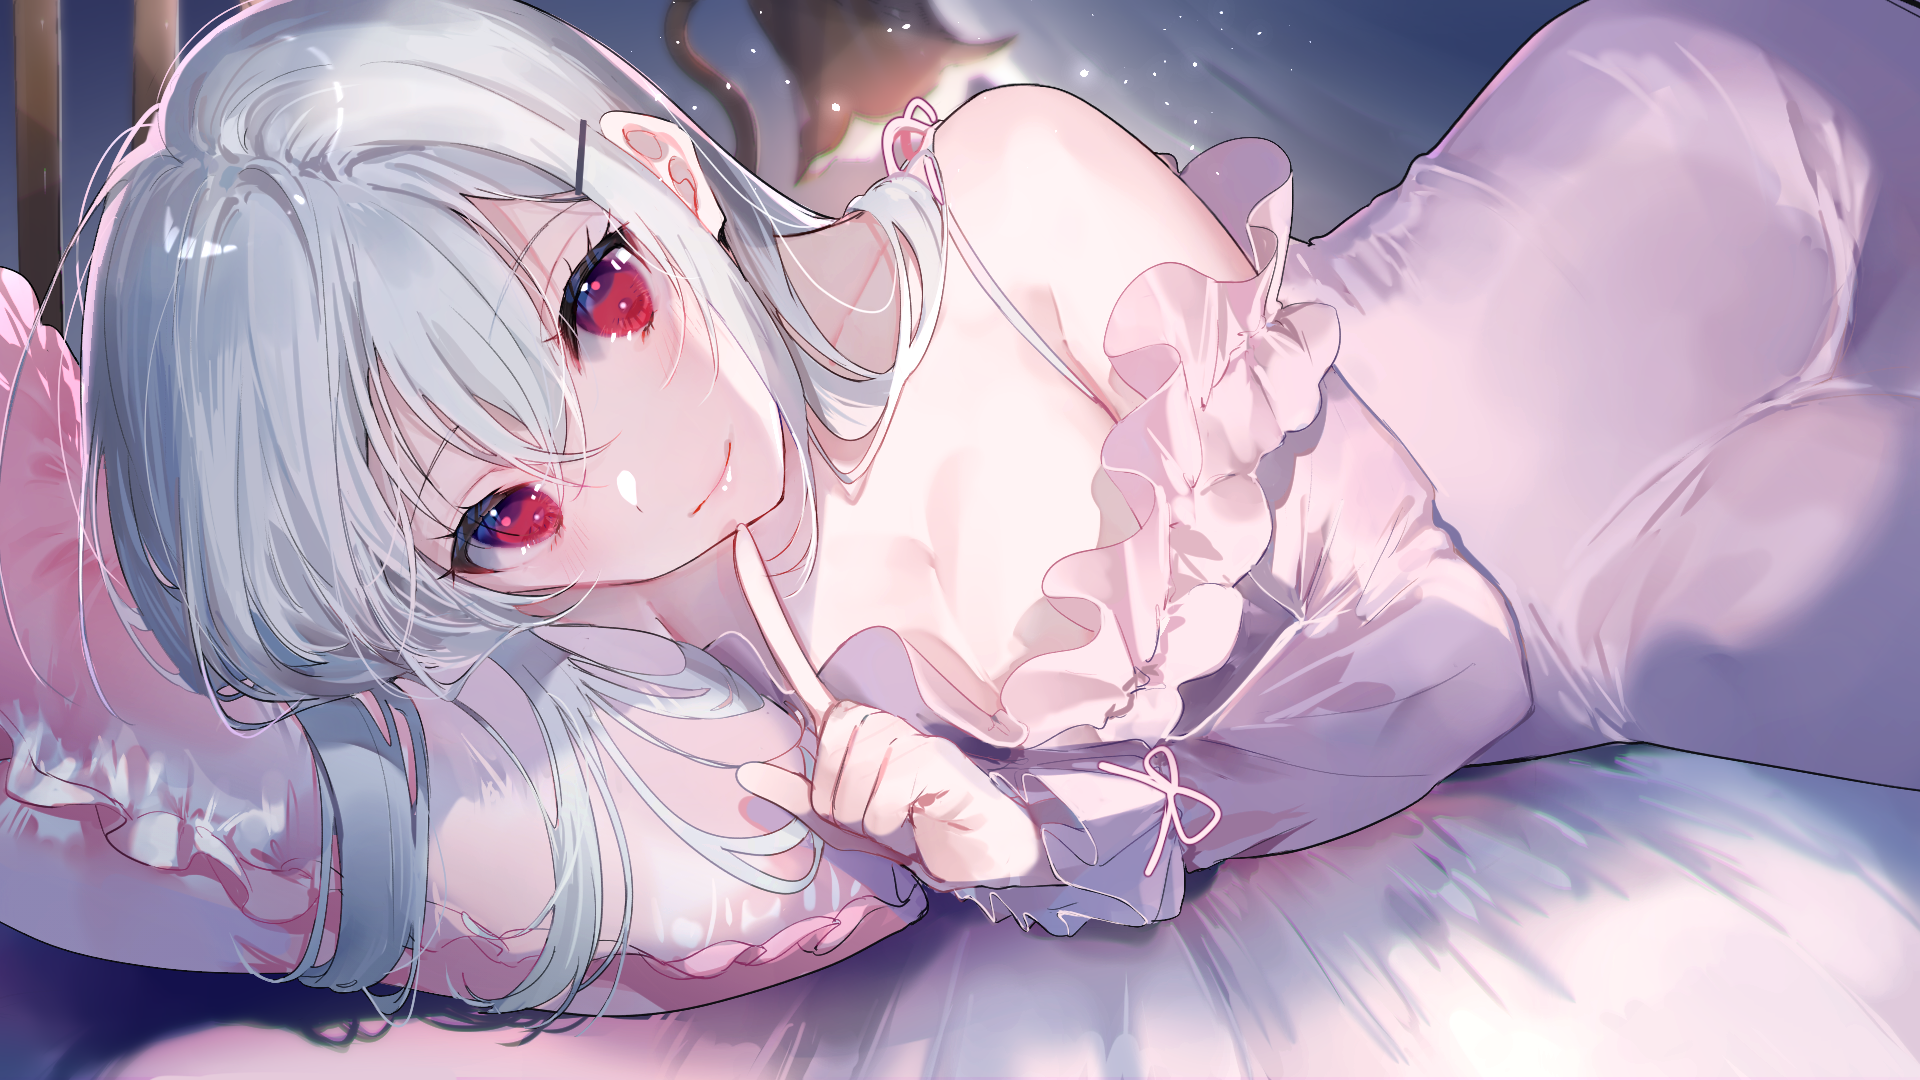 Anime 1920x1080 anime anime girls in bed lying on side